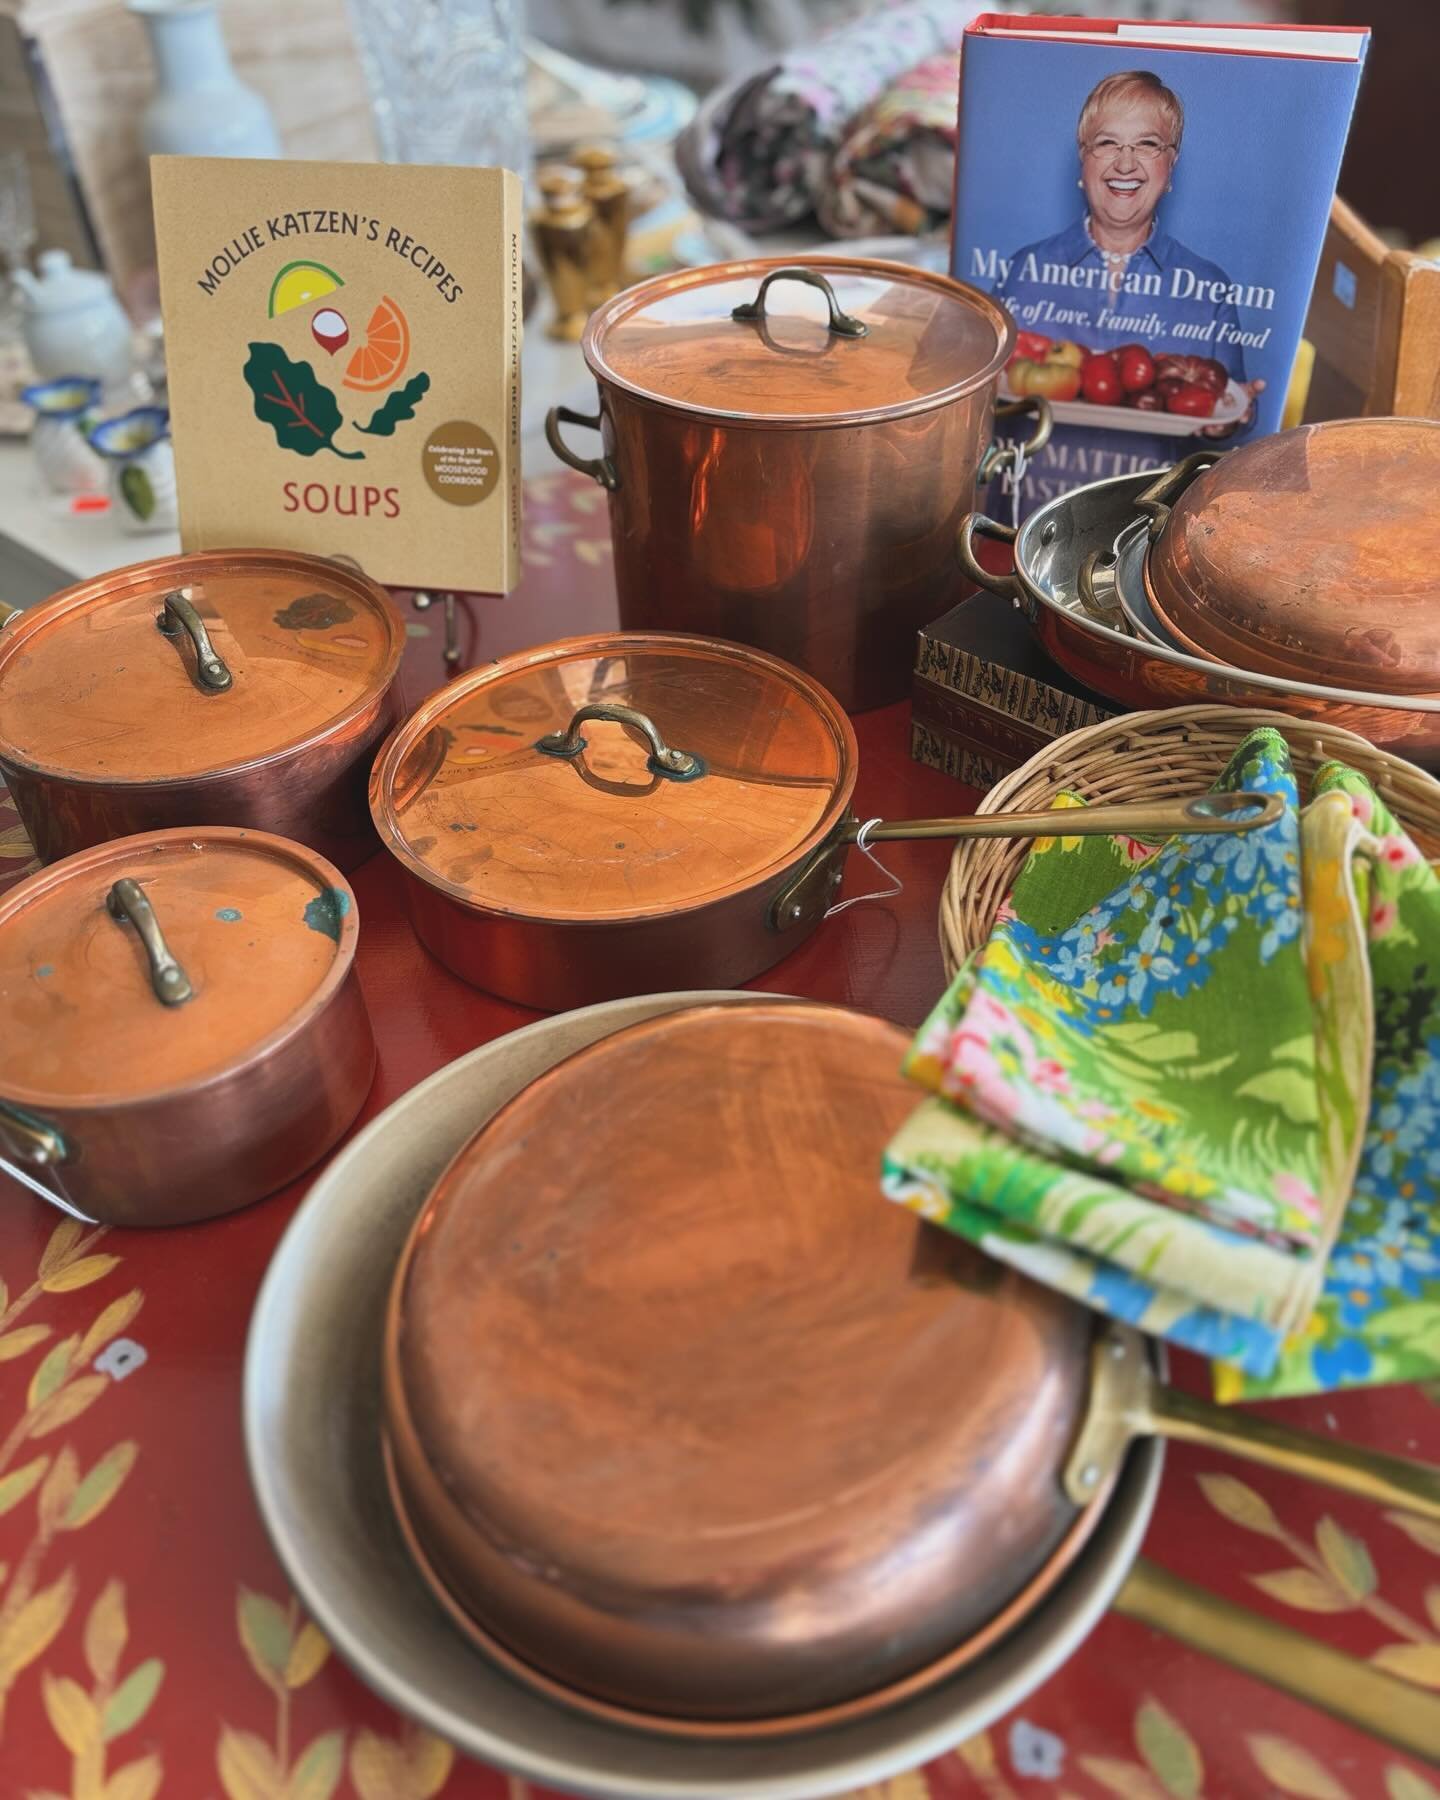 Find a penny, pick it up - all day long you&rsquo;ll have good luck. Find a darling set of vintage copper pots, pick them up - while you can! 

#copper #copperdecor #vintagecopper #coppercollectibles #thriftedkitchen #shopsecondhand #thriftedhomedeco